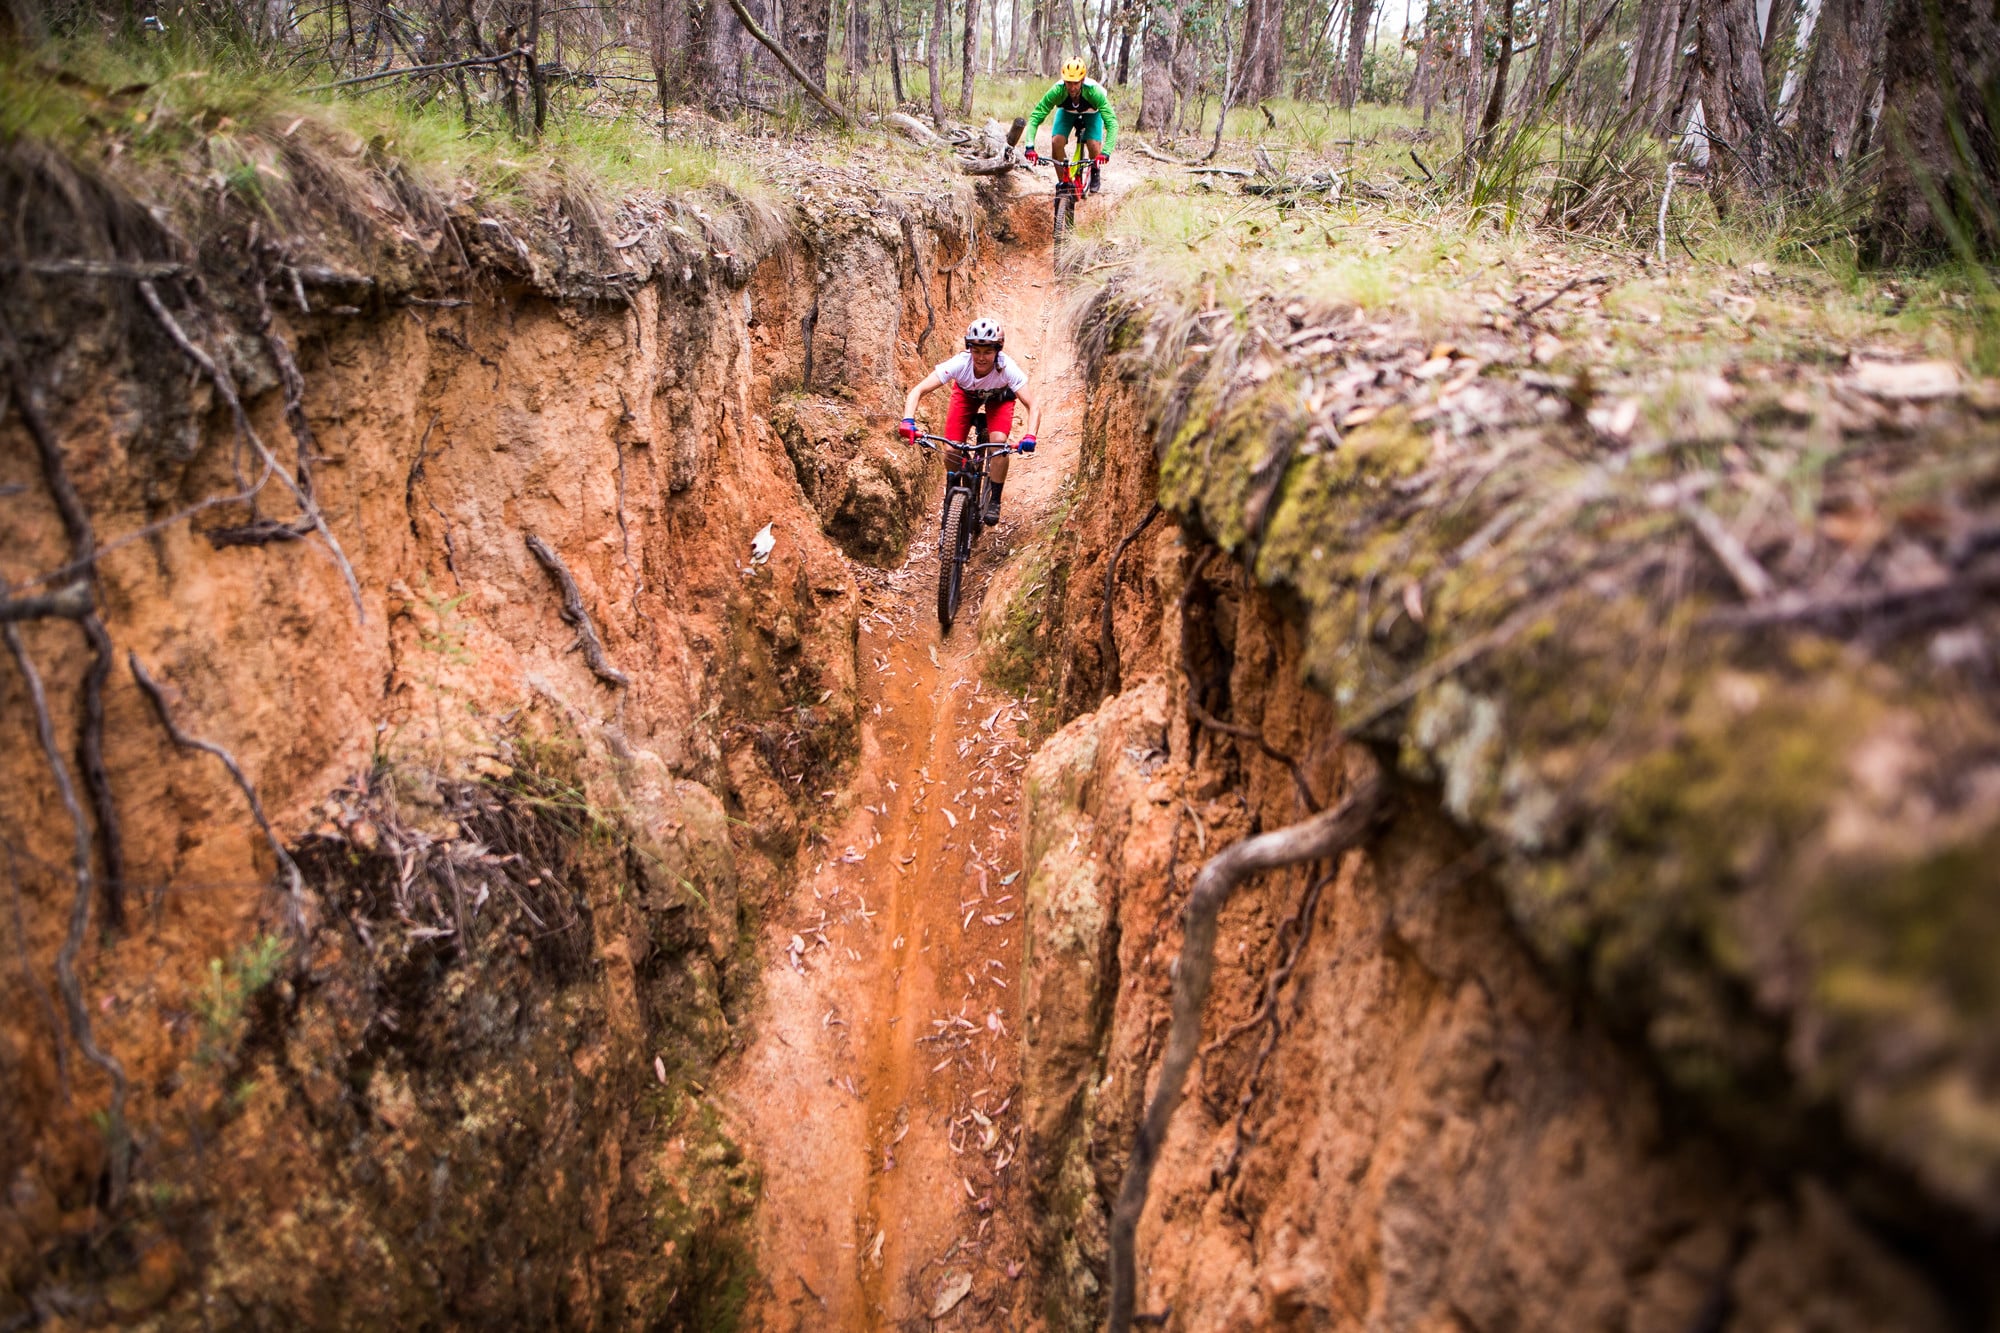 Riding with friends on Yackandandah MTB Park's iconic Carcass Canyon trail